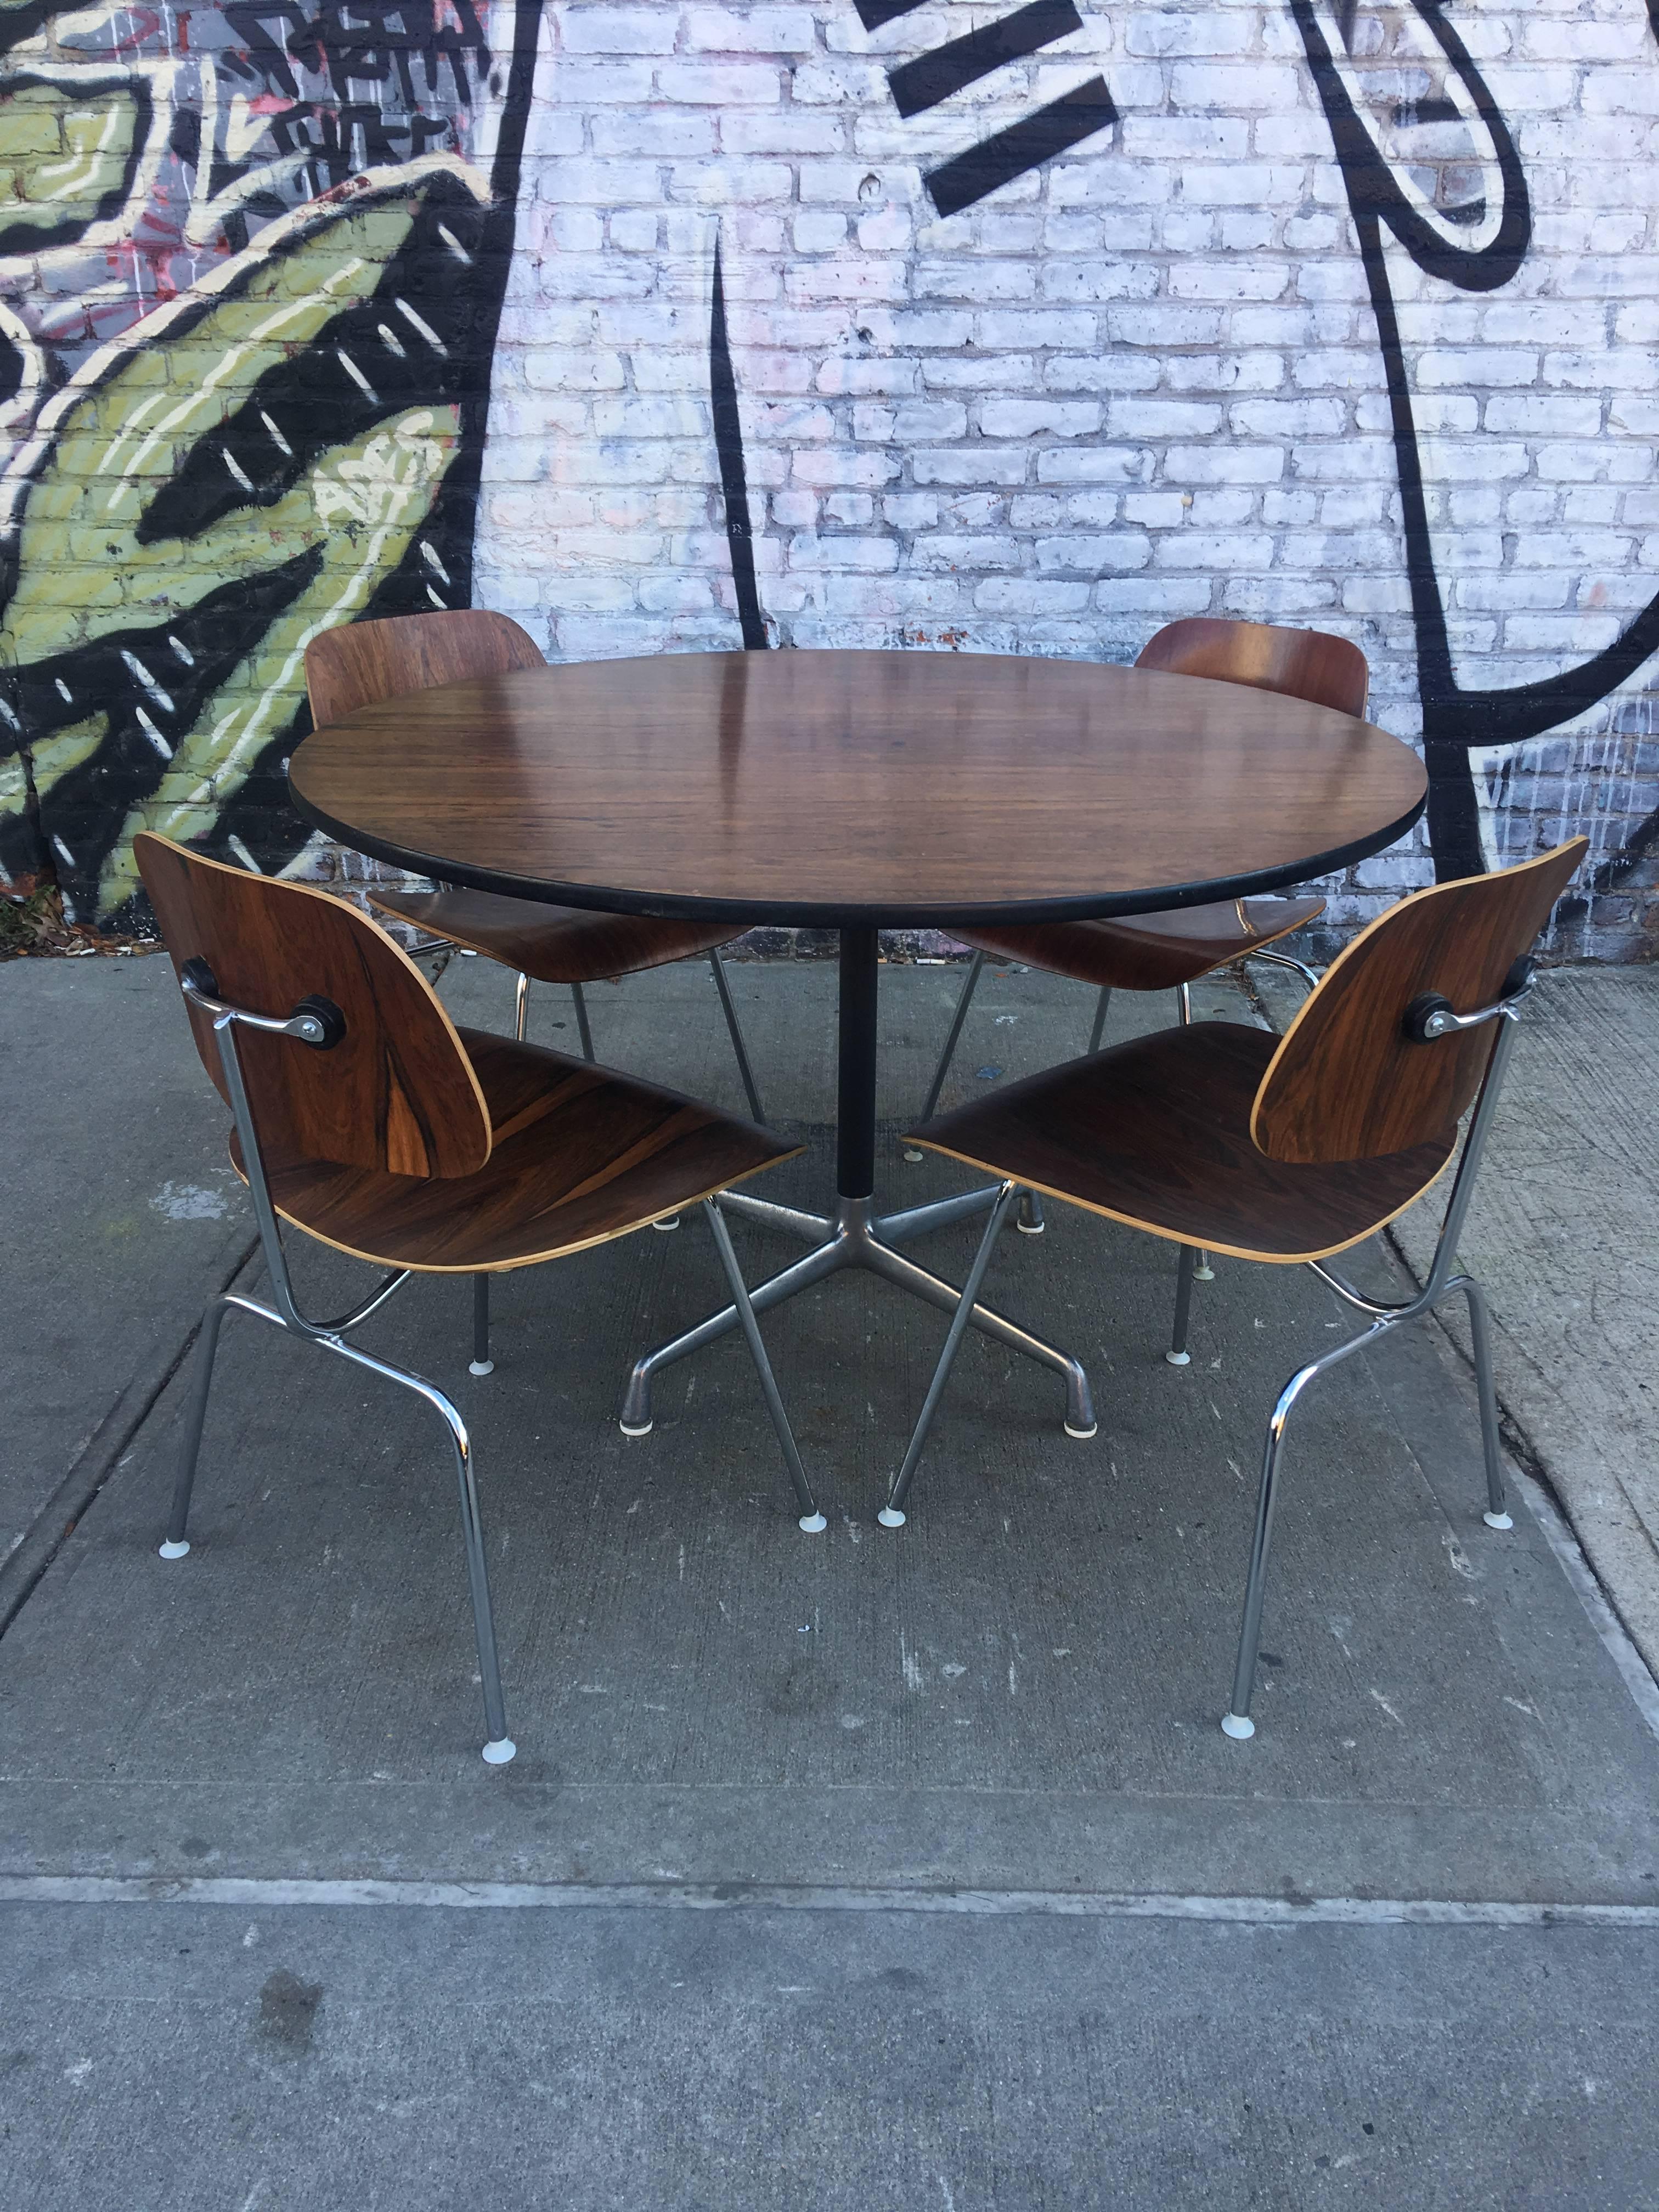 Herman Miller Eames rosewood dining set. Chairs in impeccable condition. Table can accommodate six chairs and we have two additional matching rosewood dining chairs. Table on segmented aluminium base. Table rope in very good vintage condition.